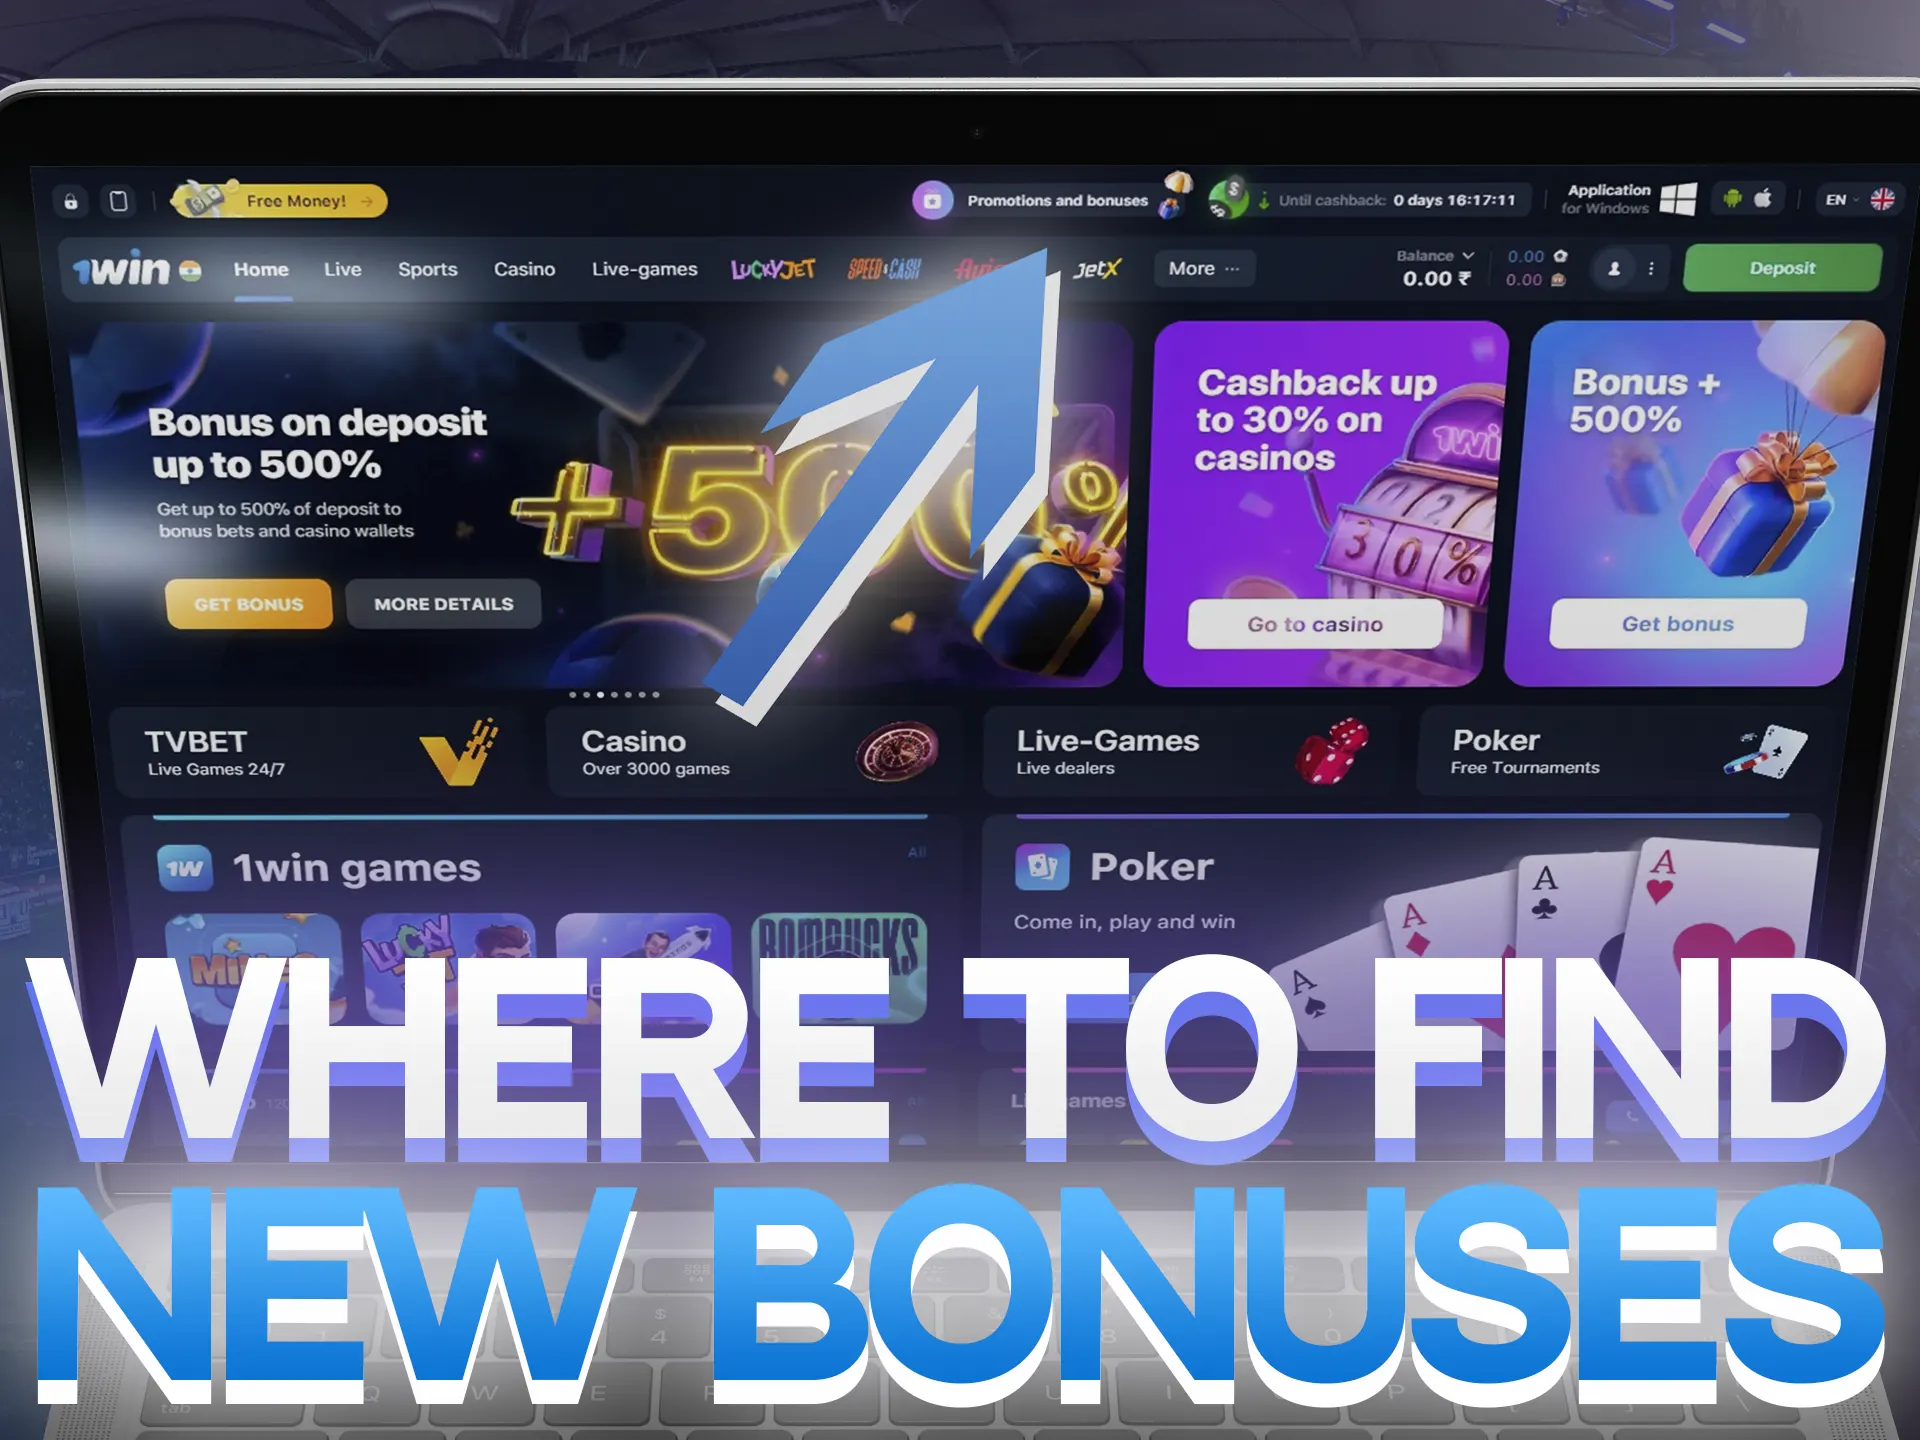 Find out where to find and get new bonuses from 1Win.